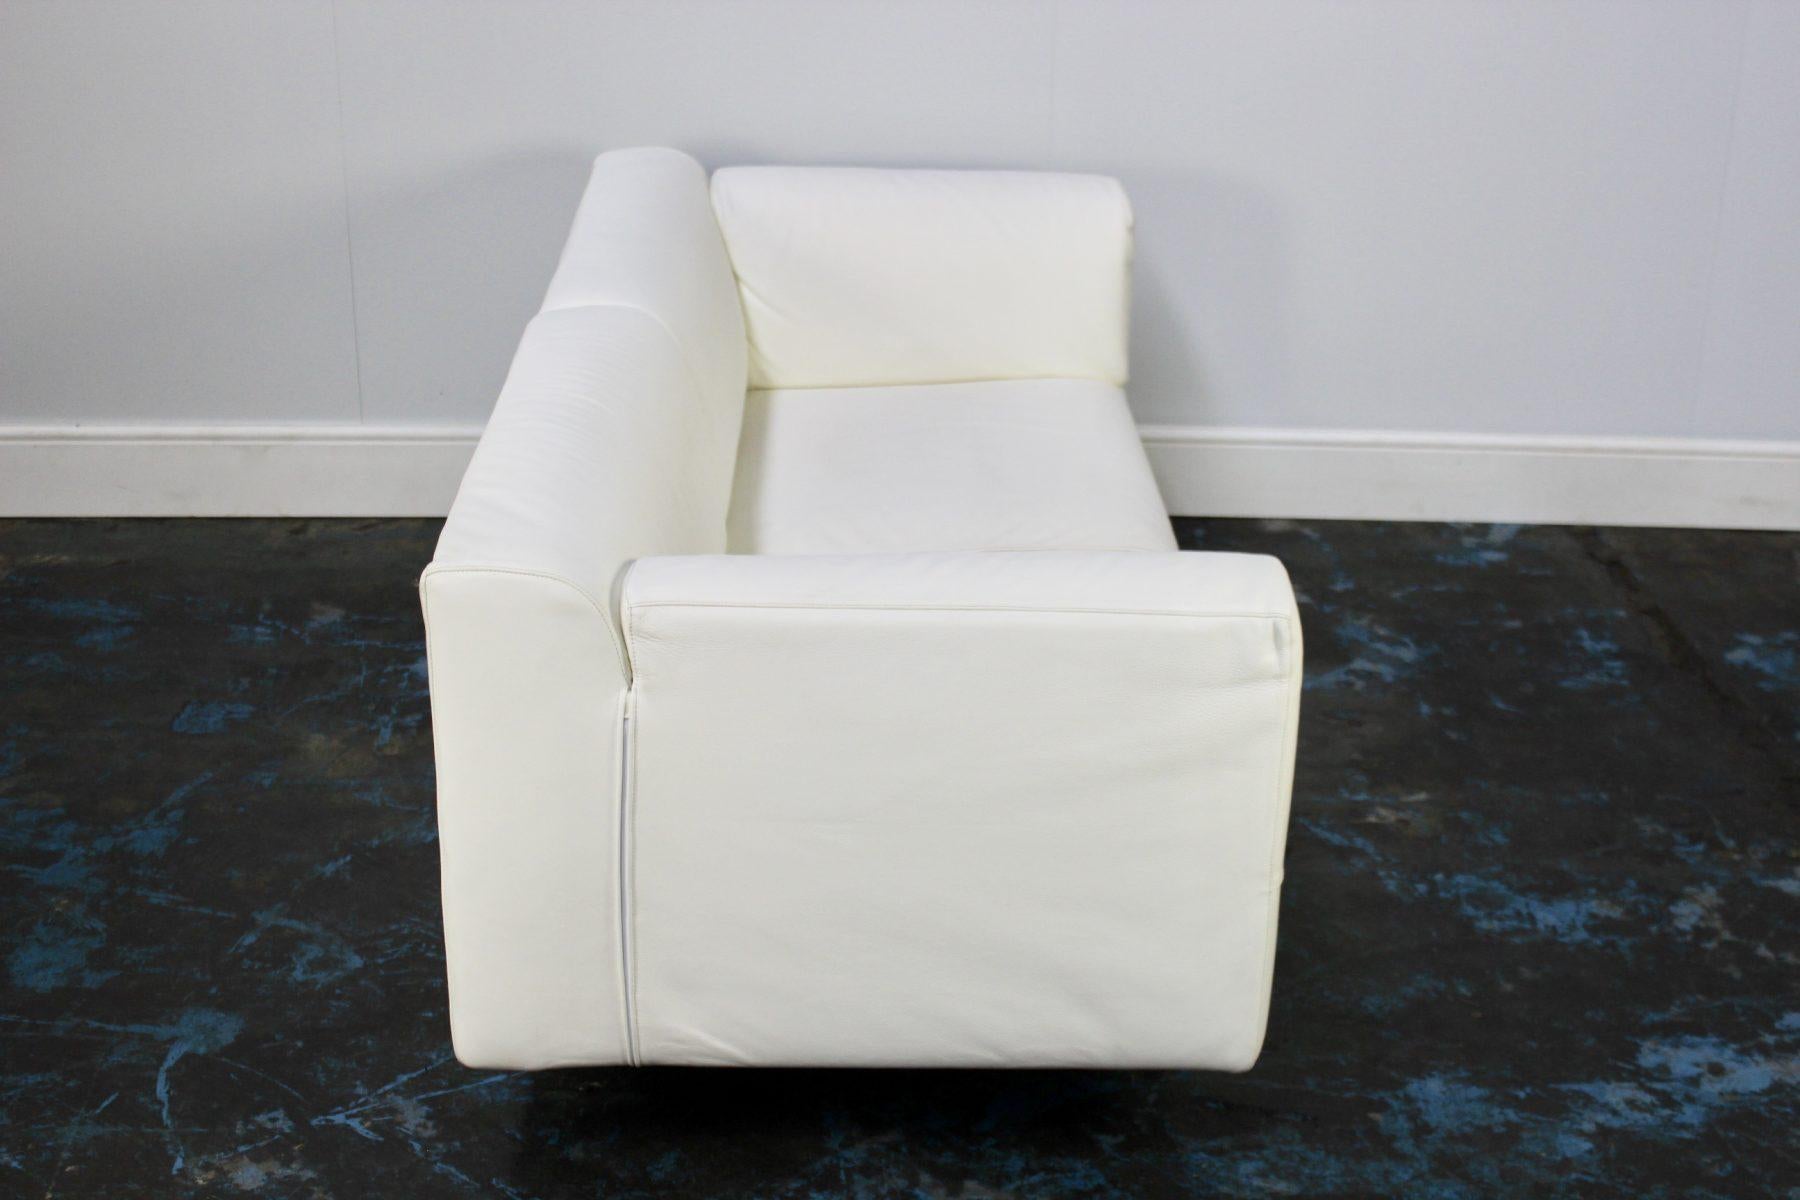 Cassina “250 Met” Large 2-Seat Sofa in Chalk White Leather For Sale 6